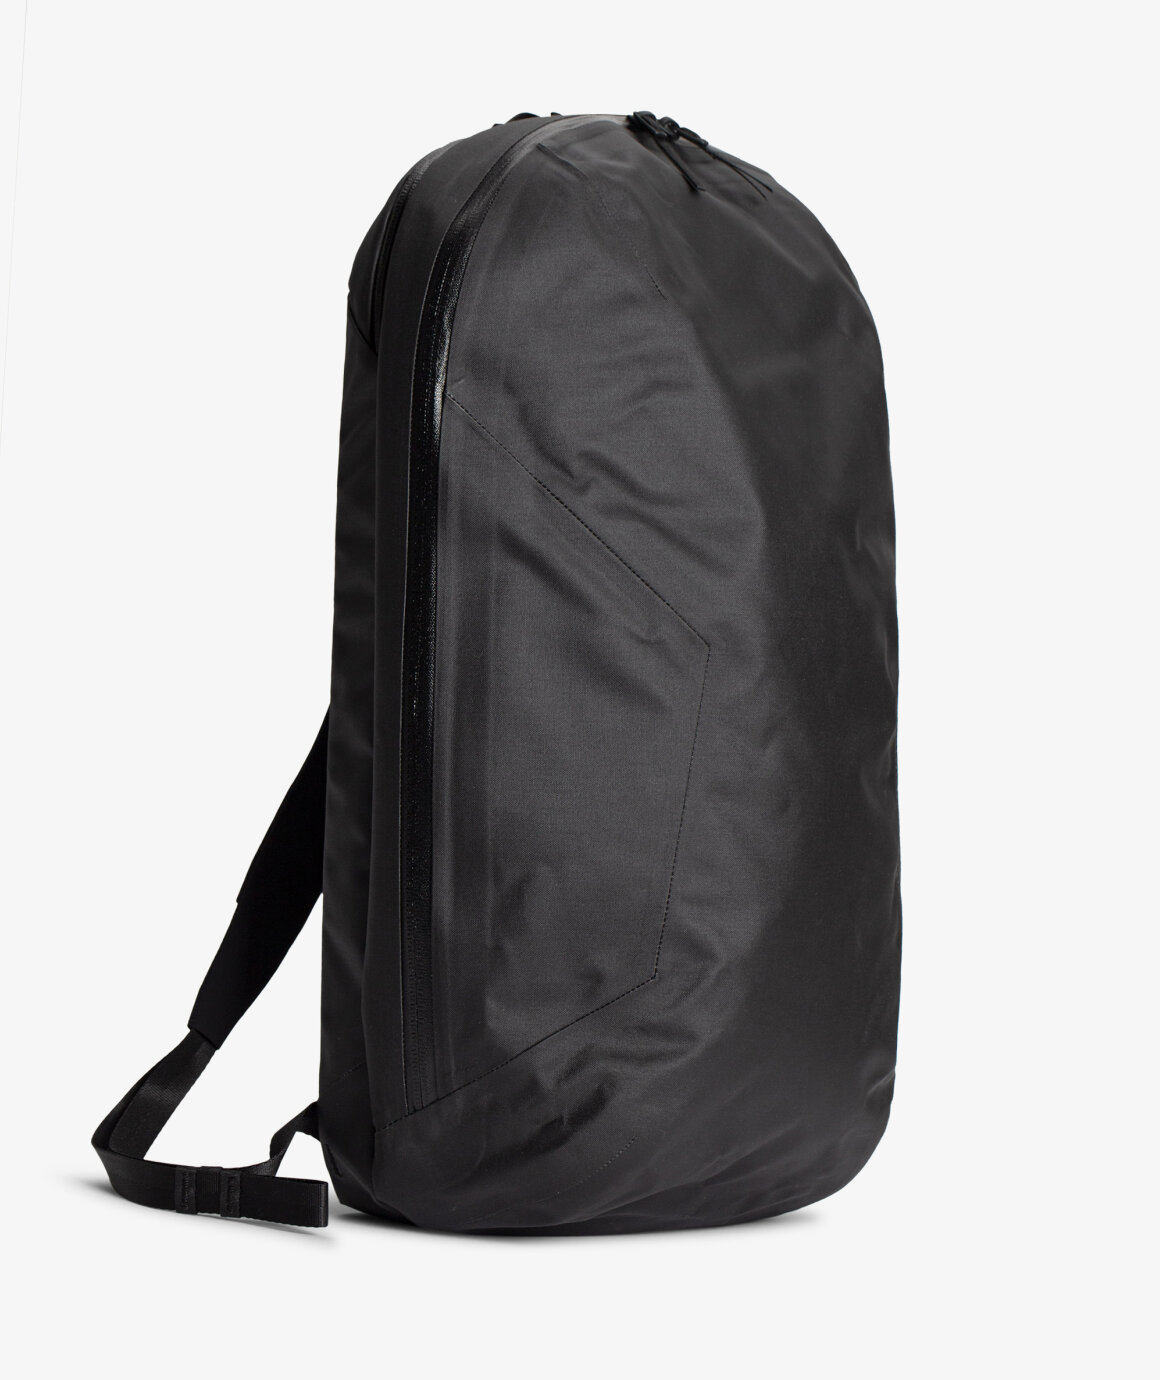 Norse Store | Shipping Worldwide - Veilance Nomin Pack - Black